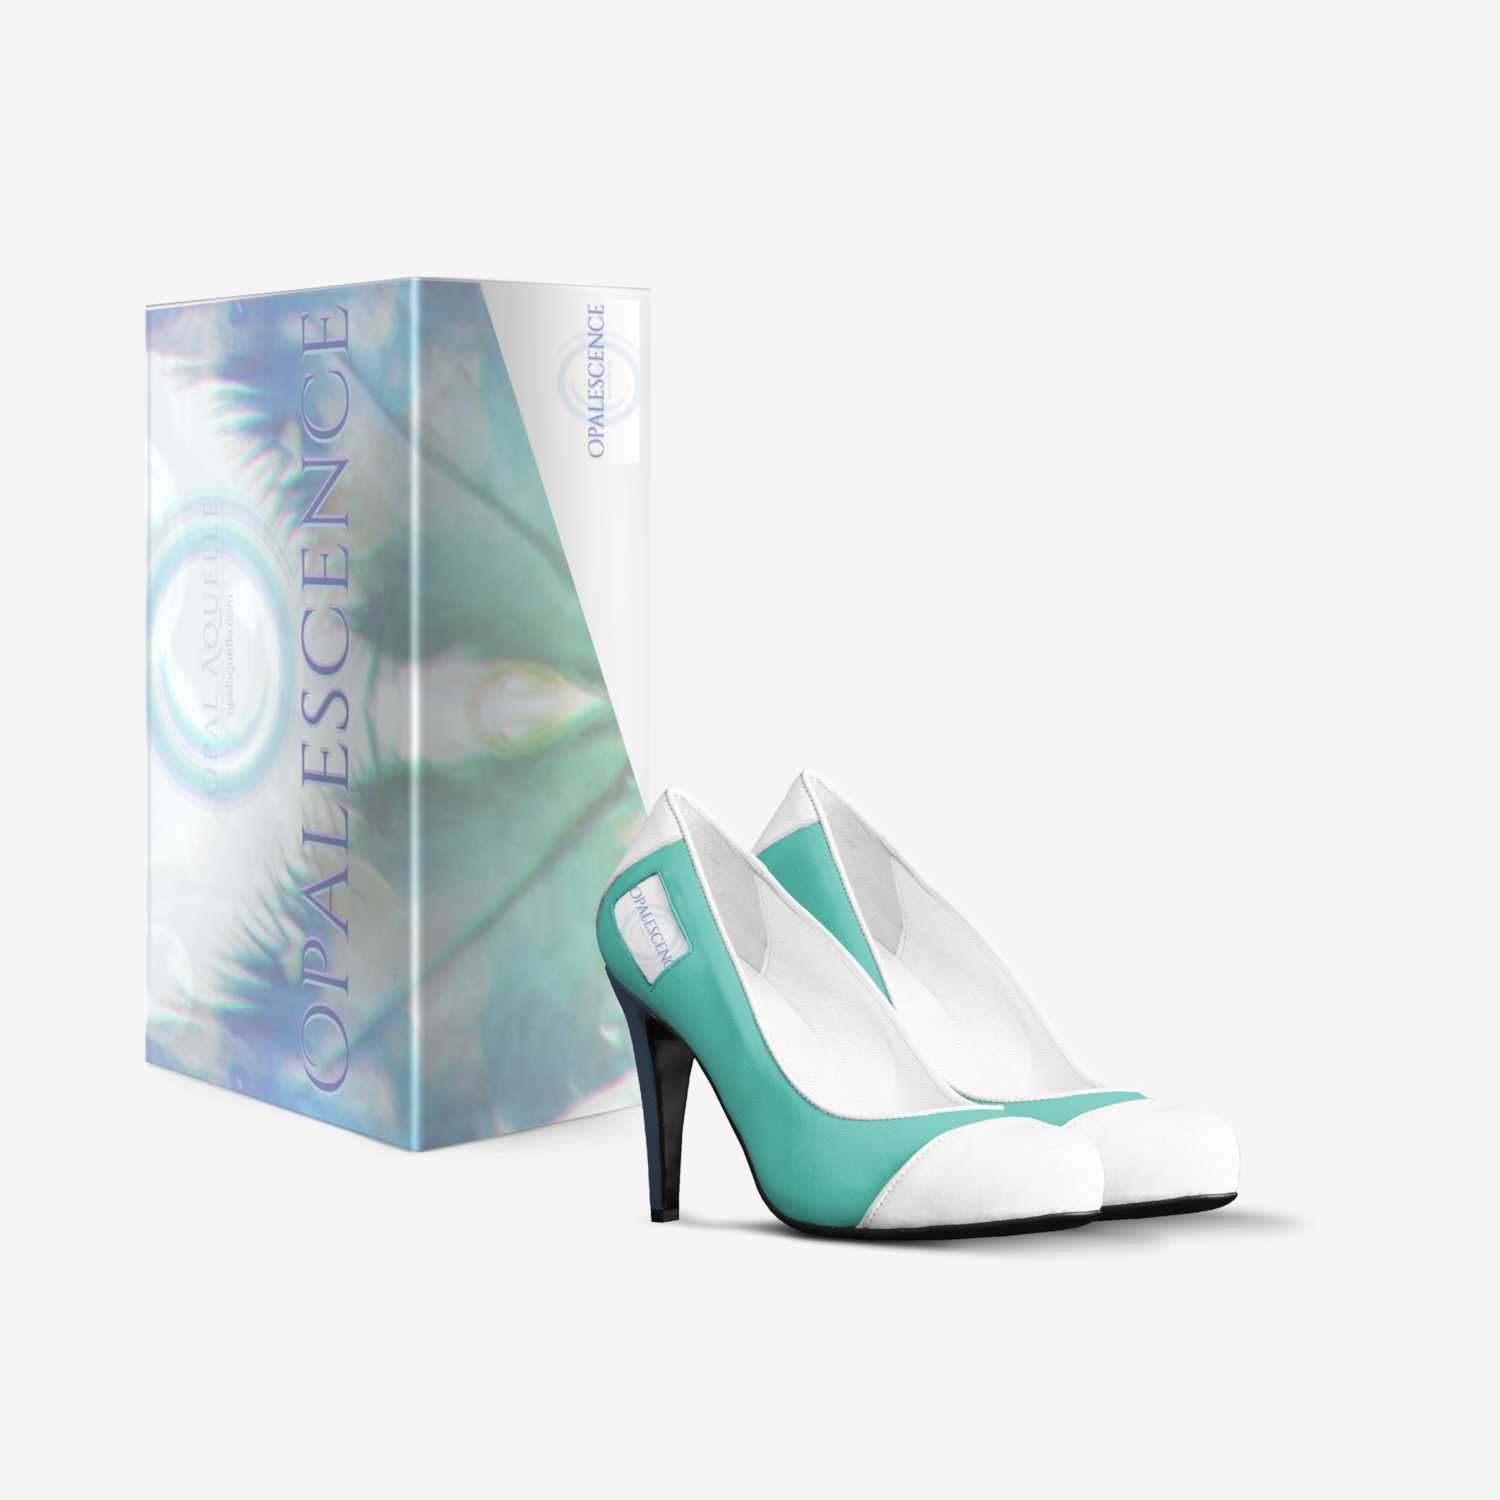 Opalescence custom made in Italy shoes by Opal Aquelle | Box view